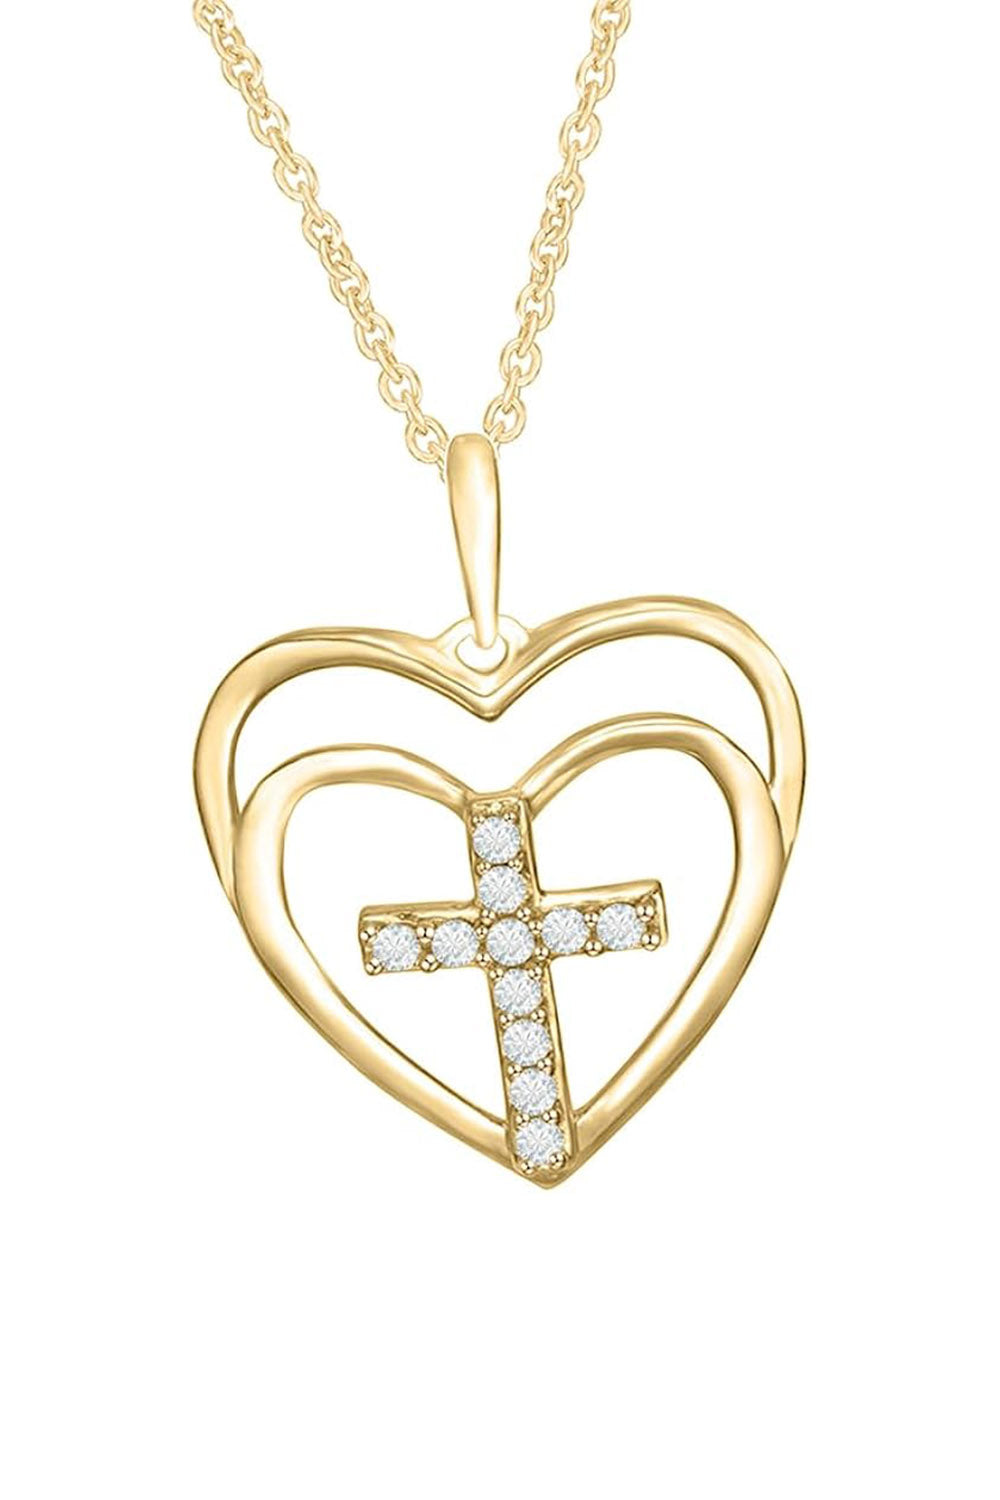 Yellow Gold Color Cross Double Heart Love Pendant Necklace